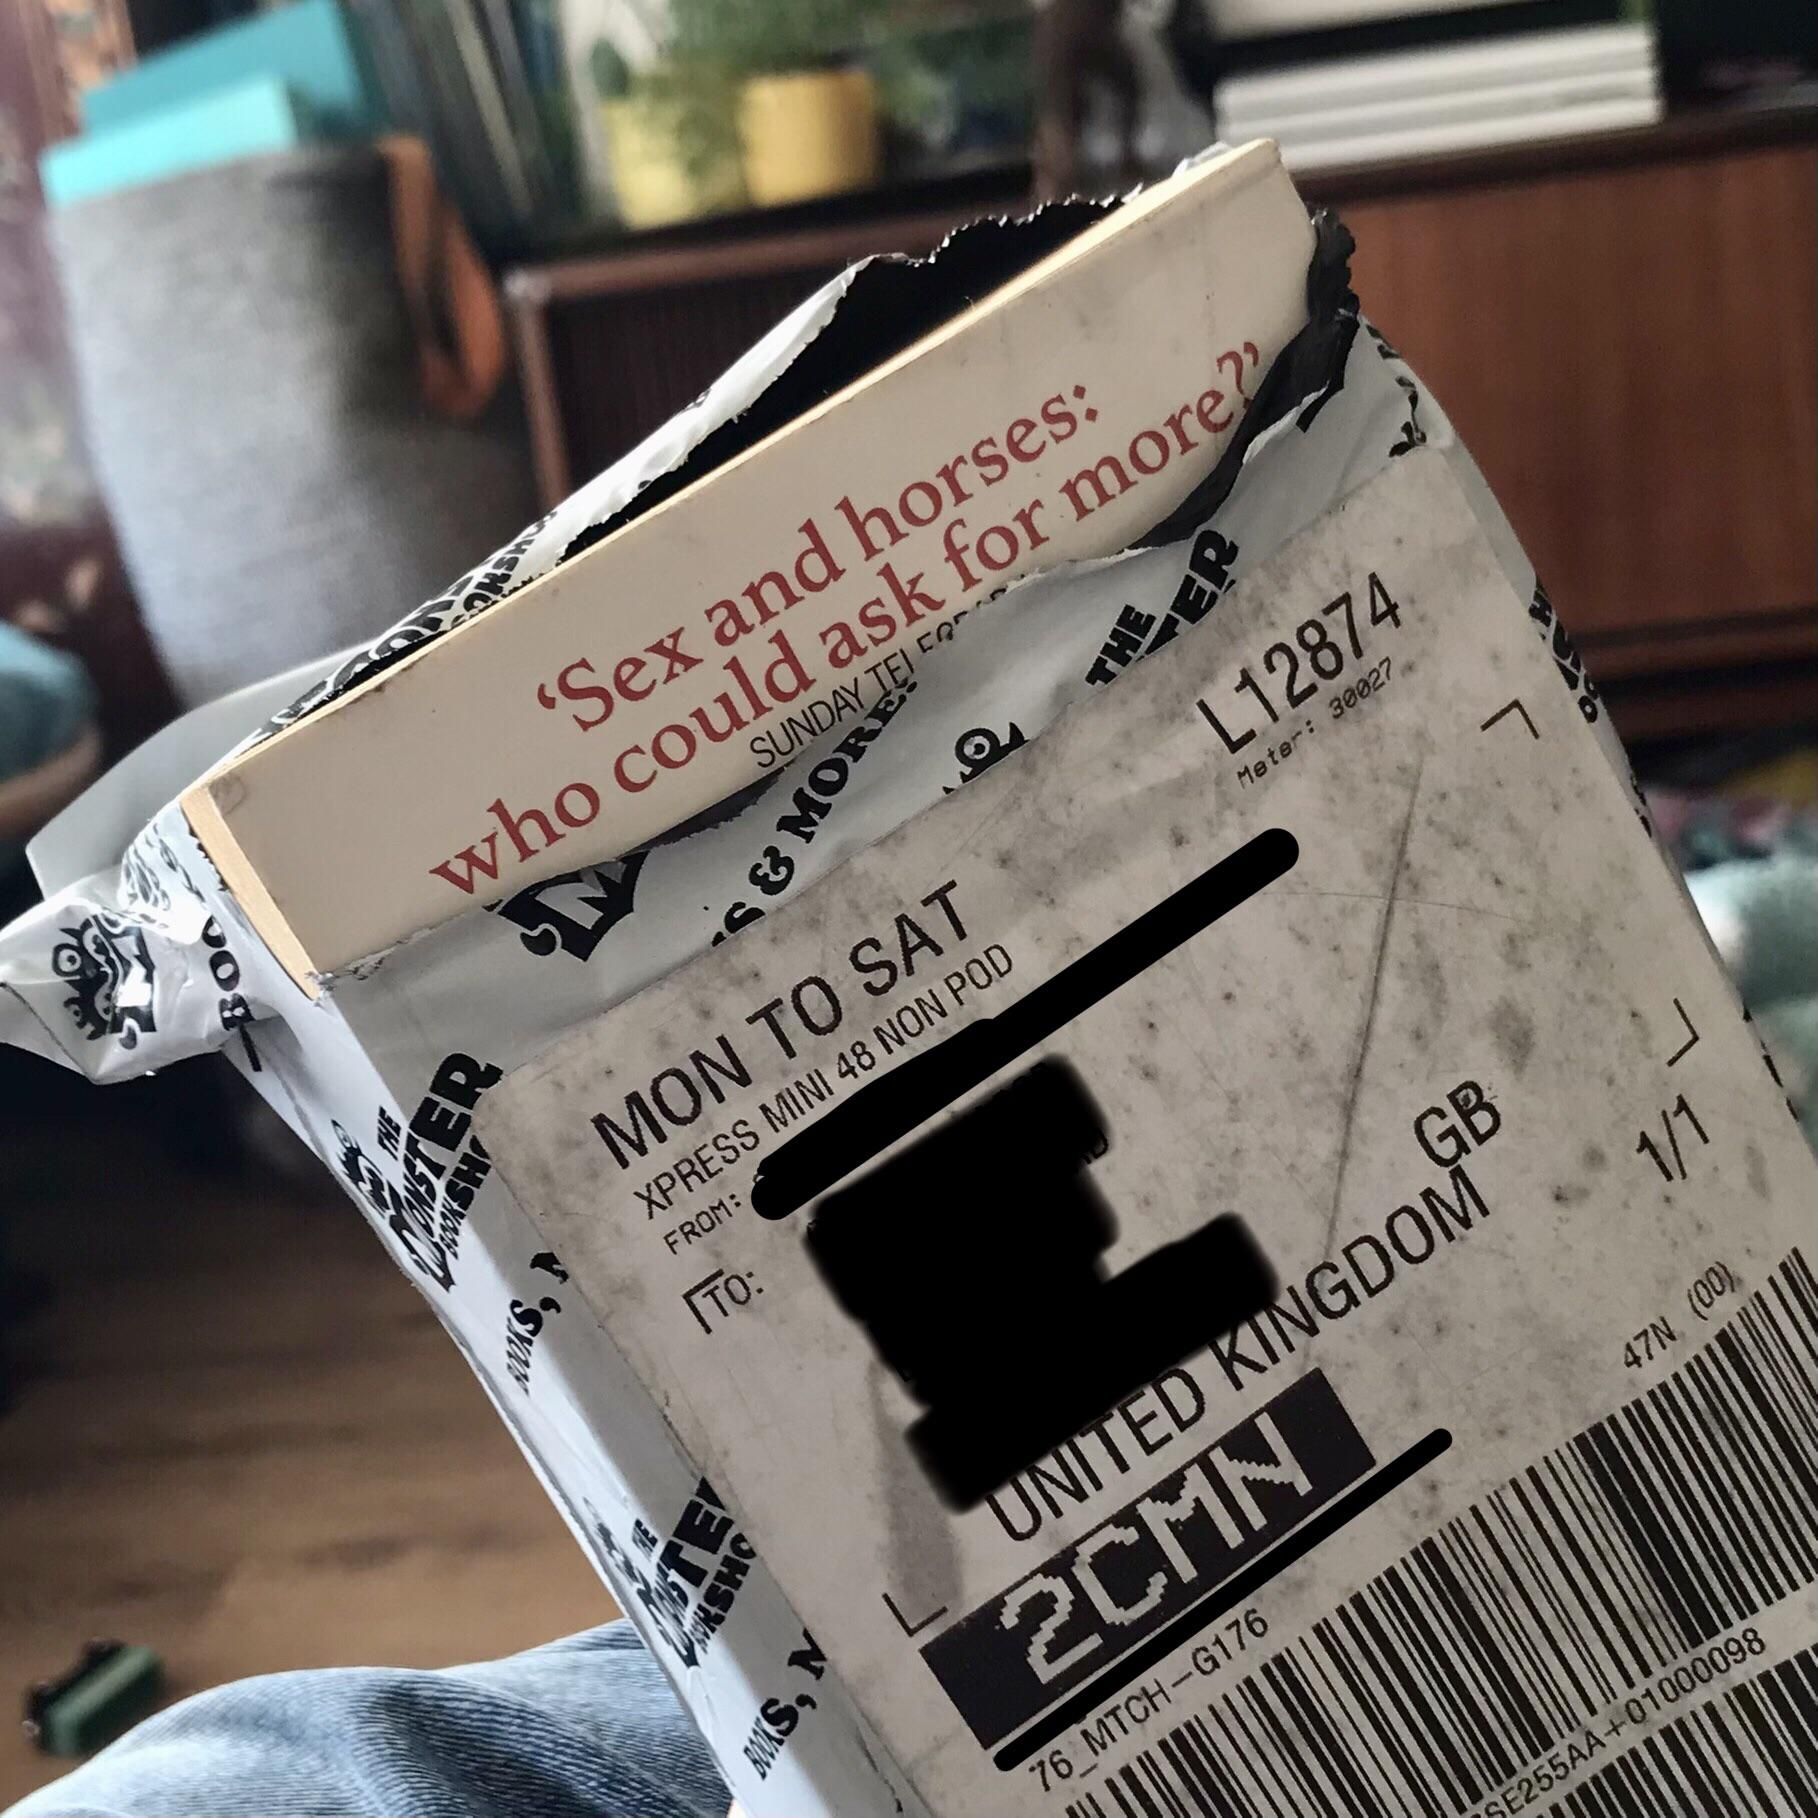 My partner ordered a book. The packaging was ripped and this was all I saw.